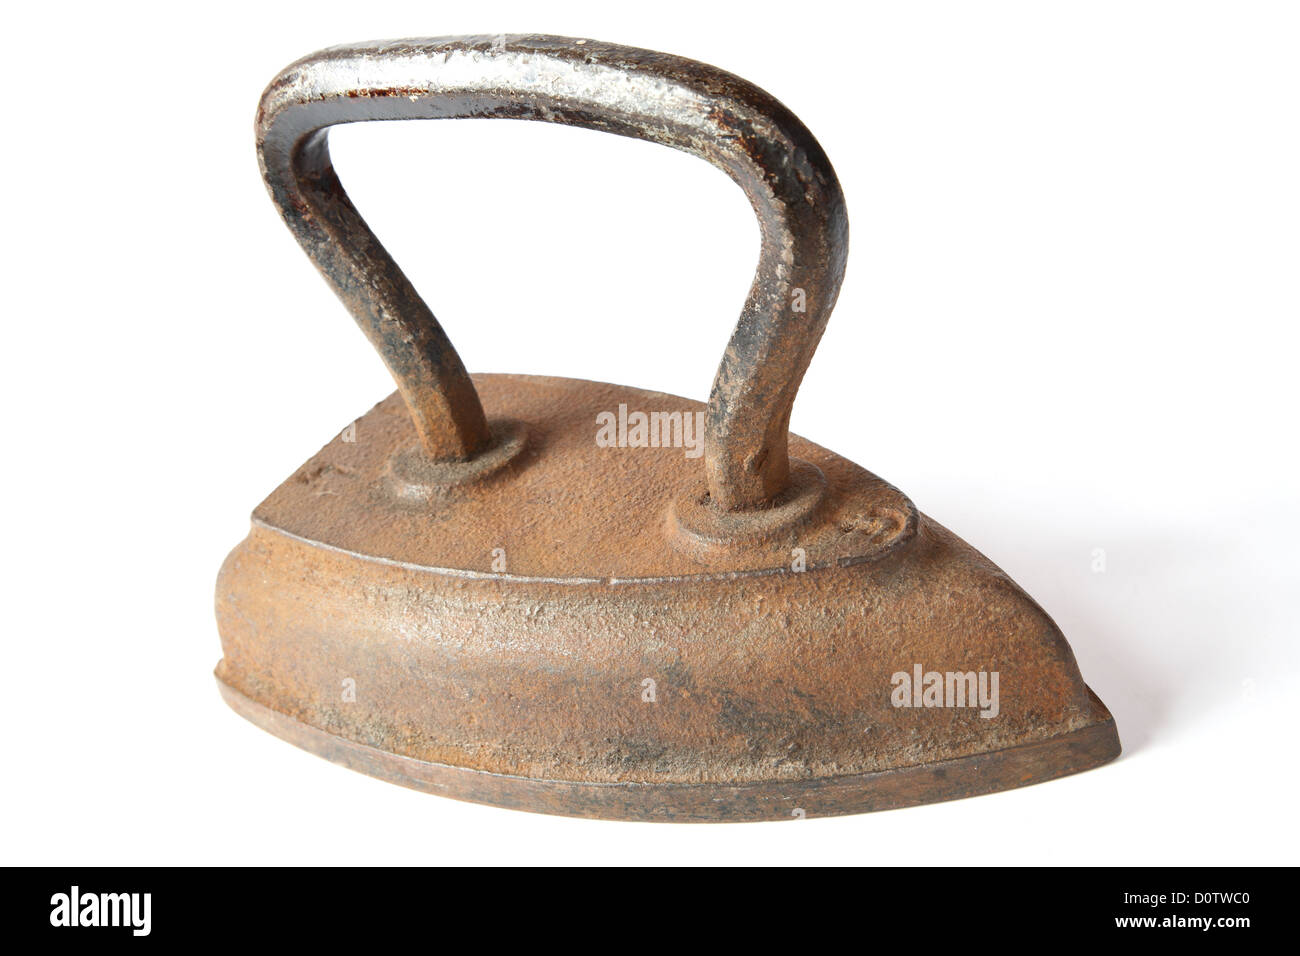 The old iron covered with rust Stock Photo